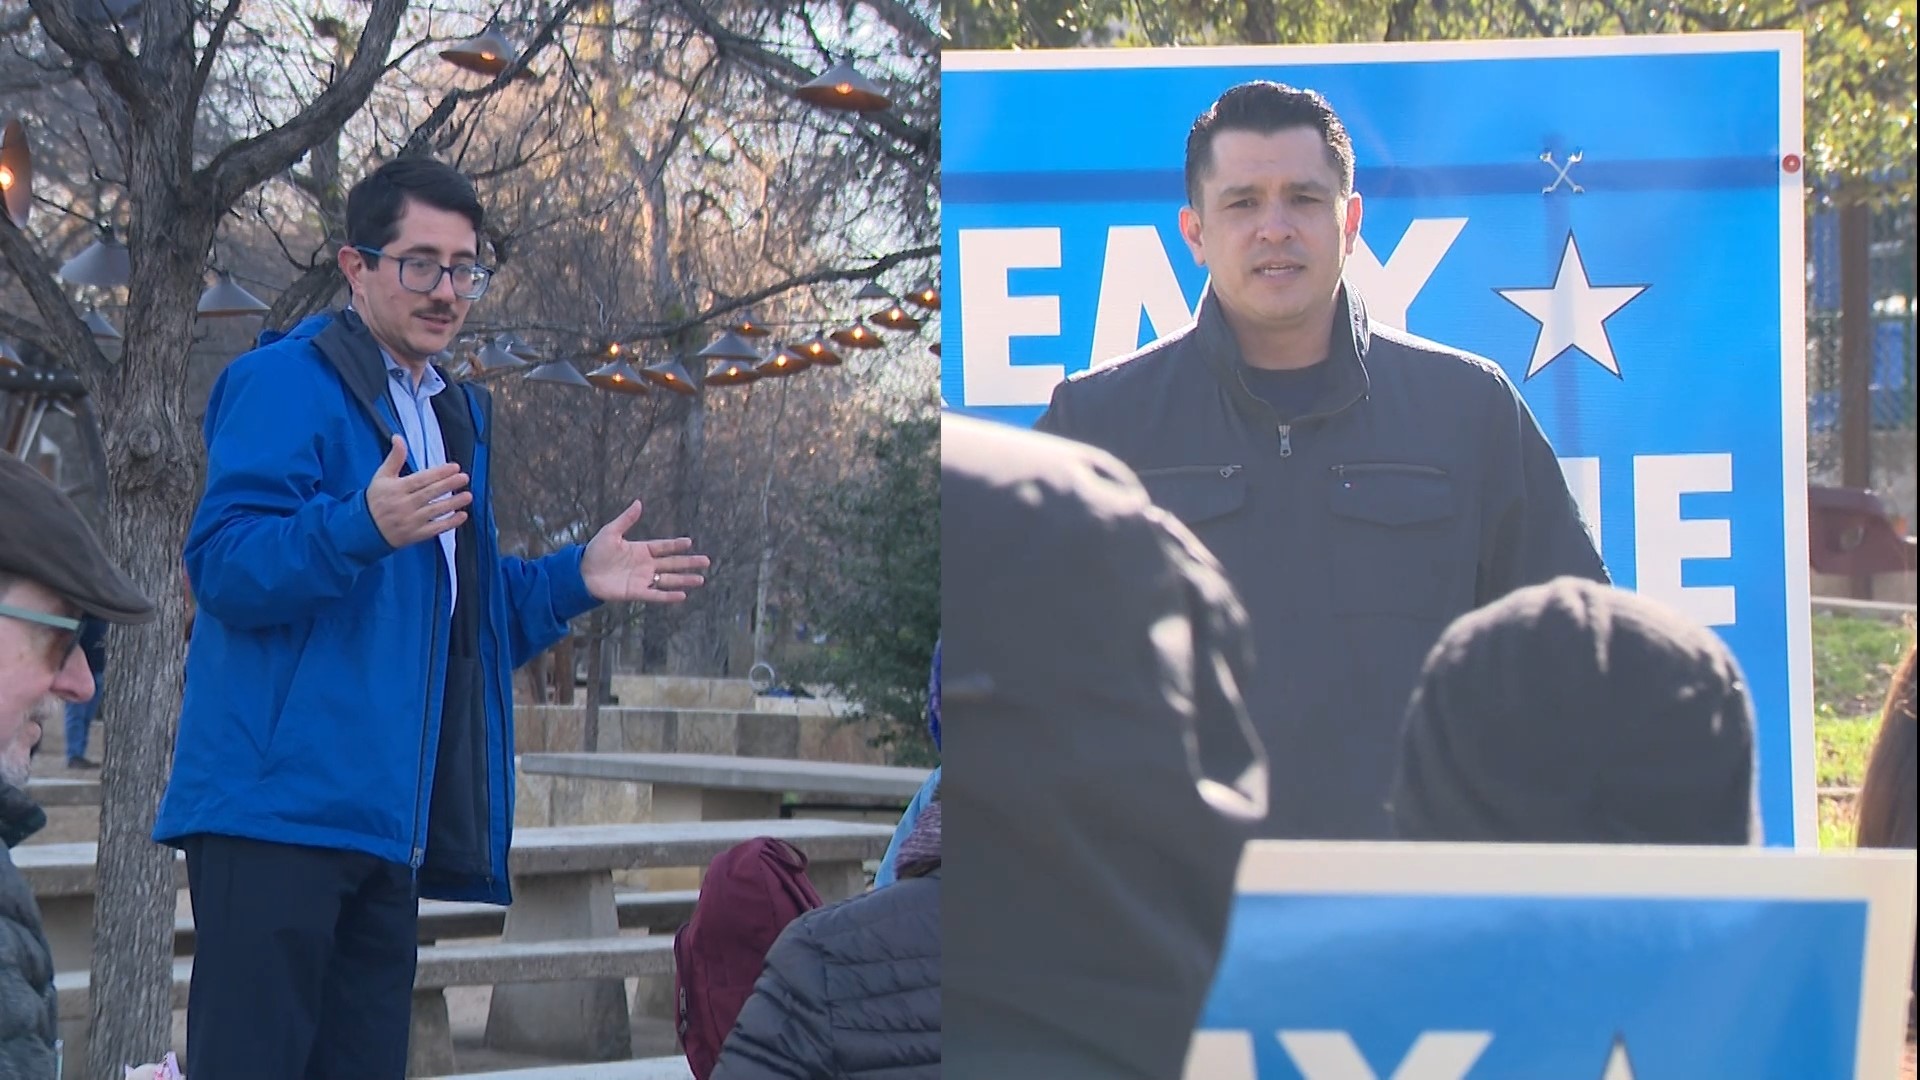 Jeremy Sylestine will face off against incumbent José Garza in the March primaries.